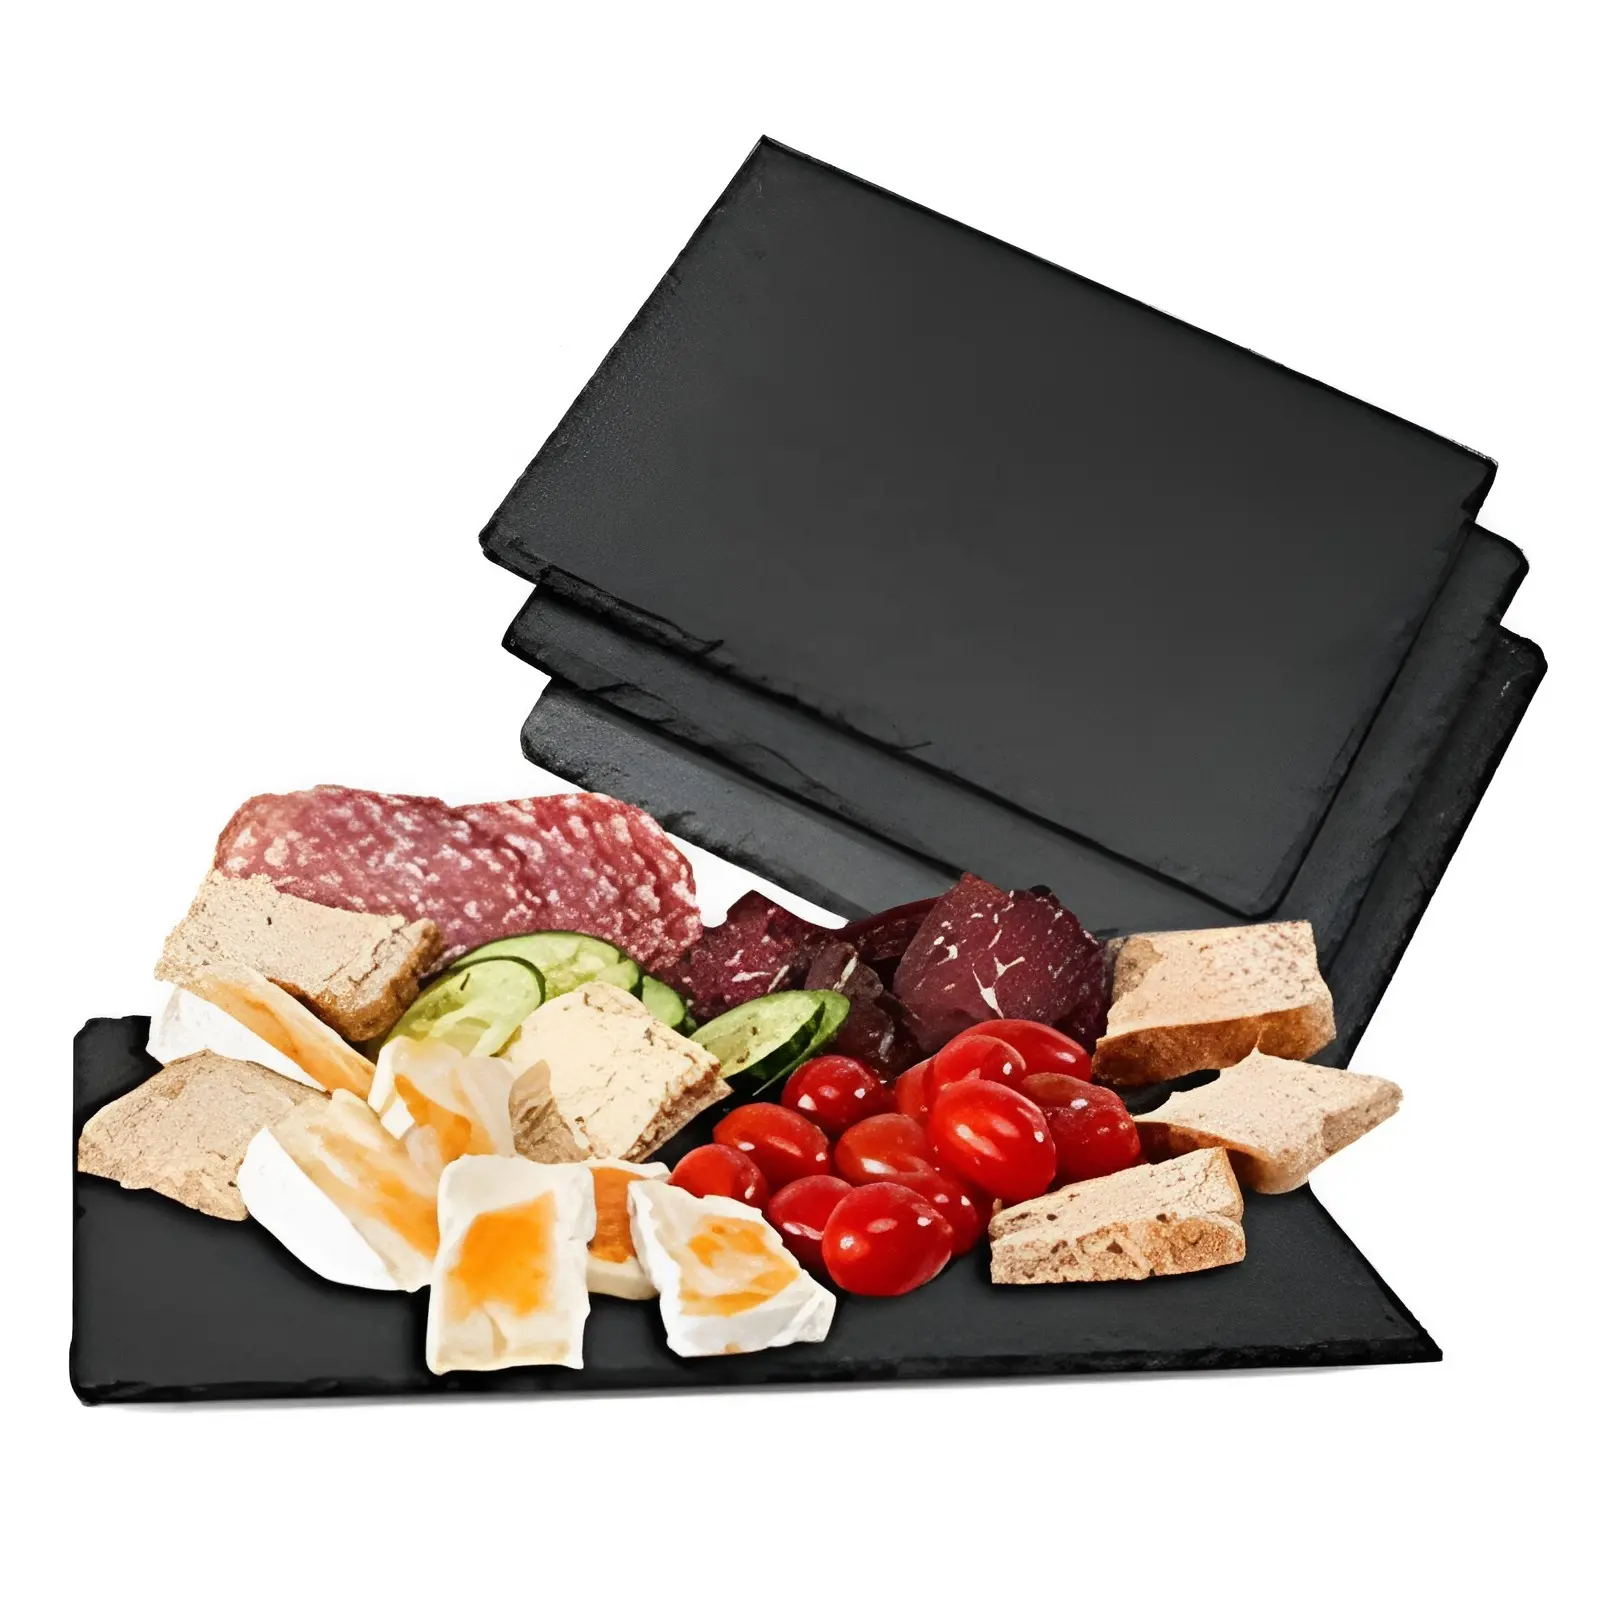 Round Medium Slate Cheese Plates Set 2pieces 10 x 10 in Charcuterie Serving Board Set for Snacking and Meat Stone Cake Tray Plates,Stone Plates 